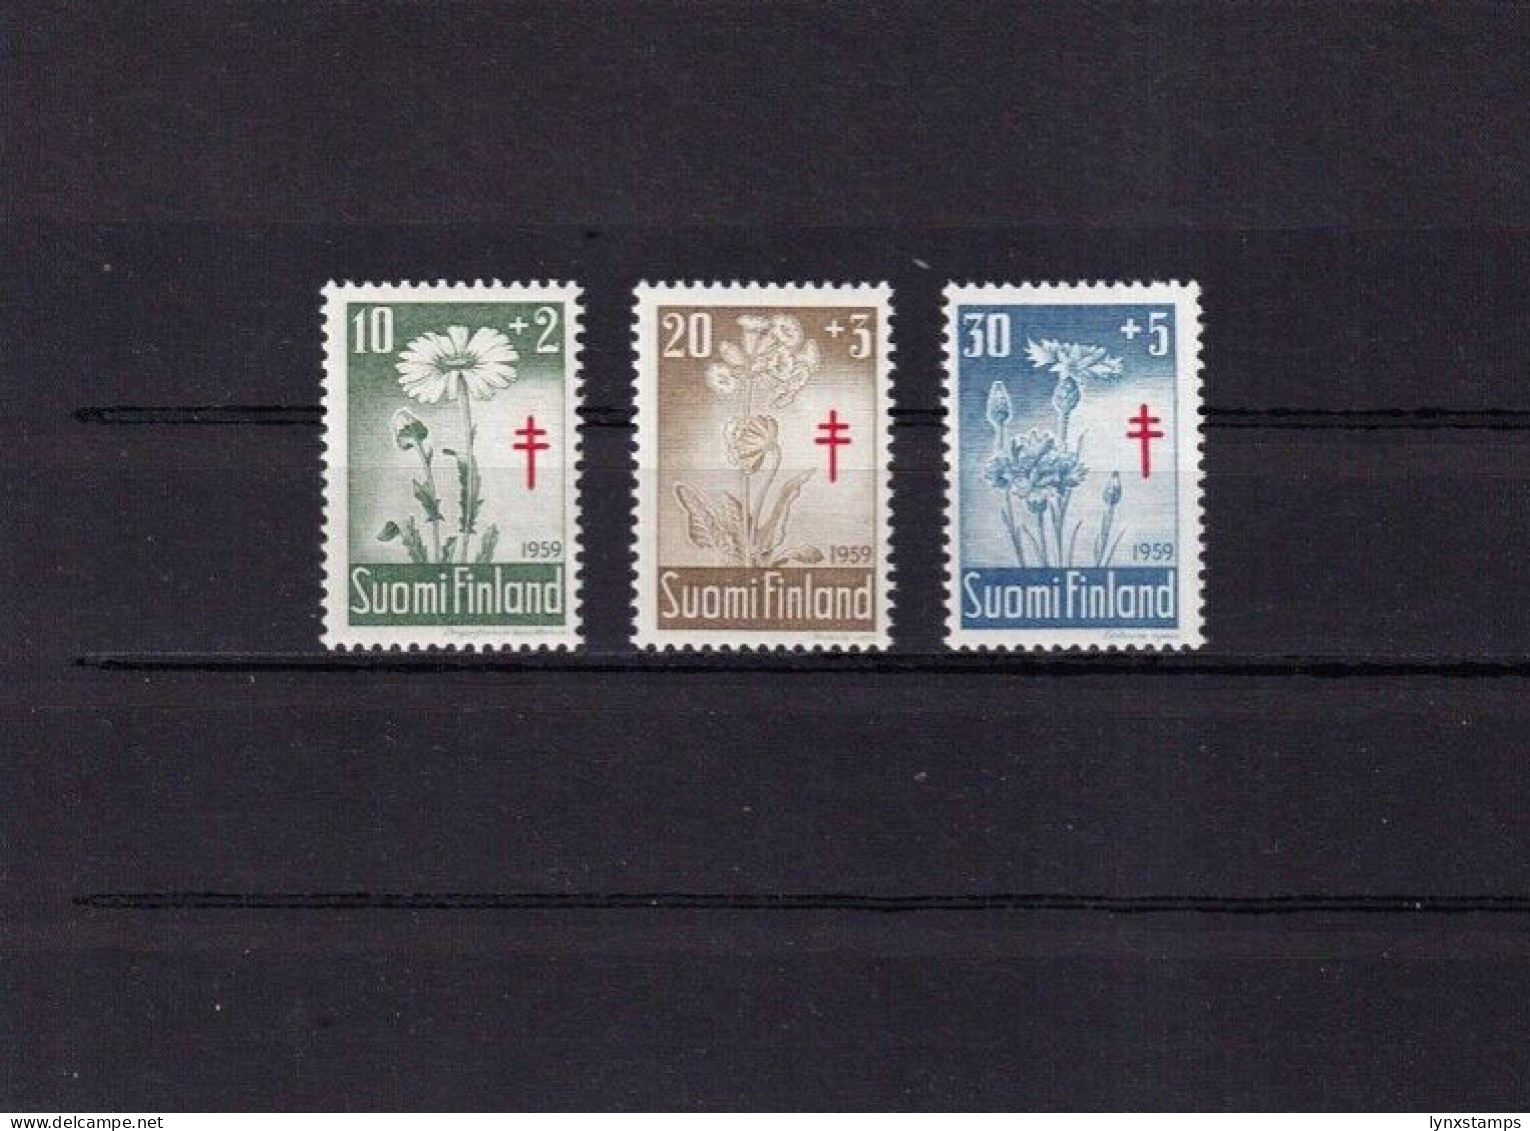 G022 Finland 1959 The Prevention Of Tuberculosis - Flowers CV$10 - Neufs